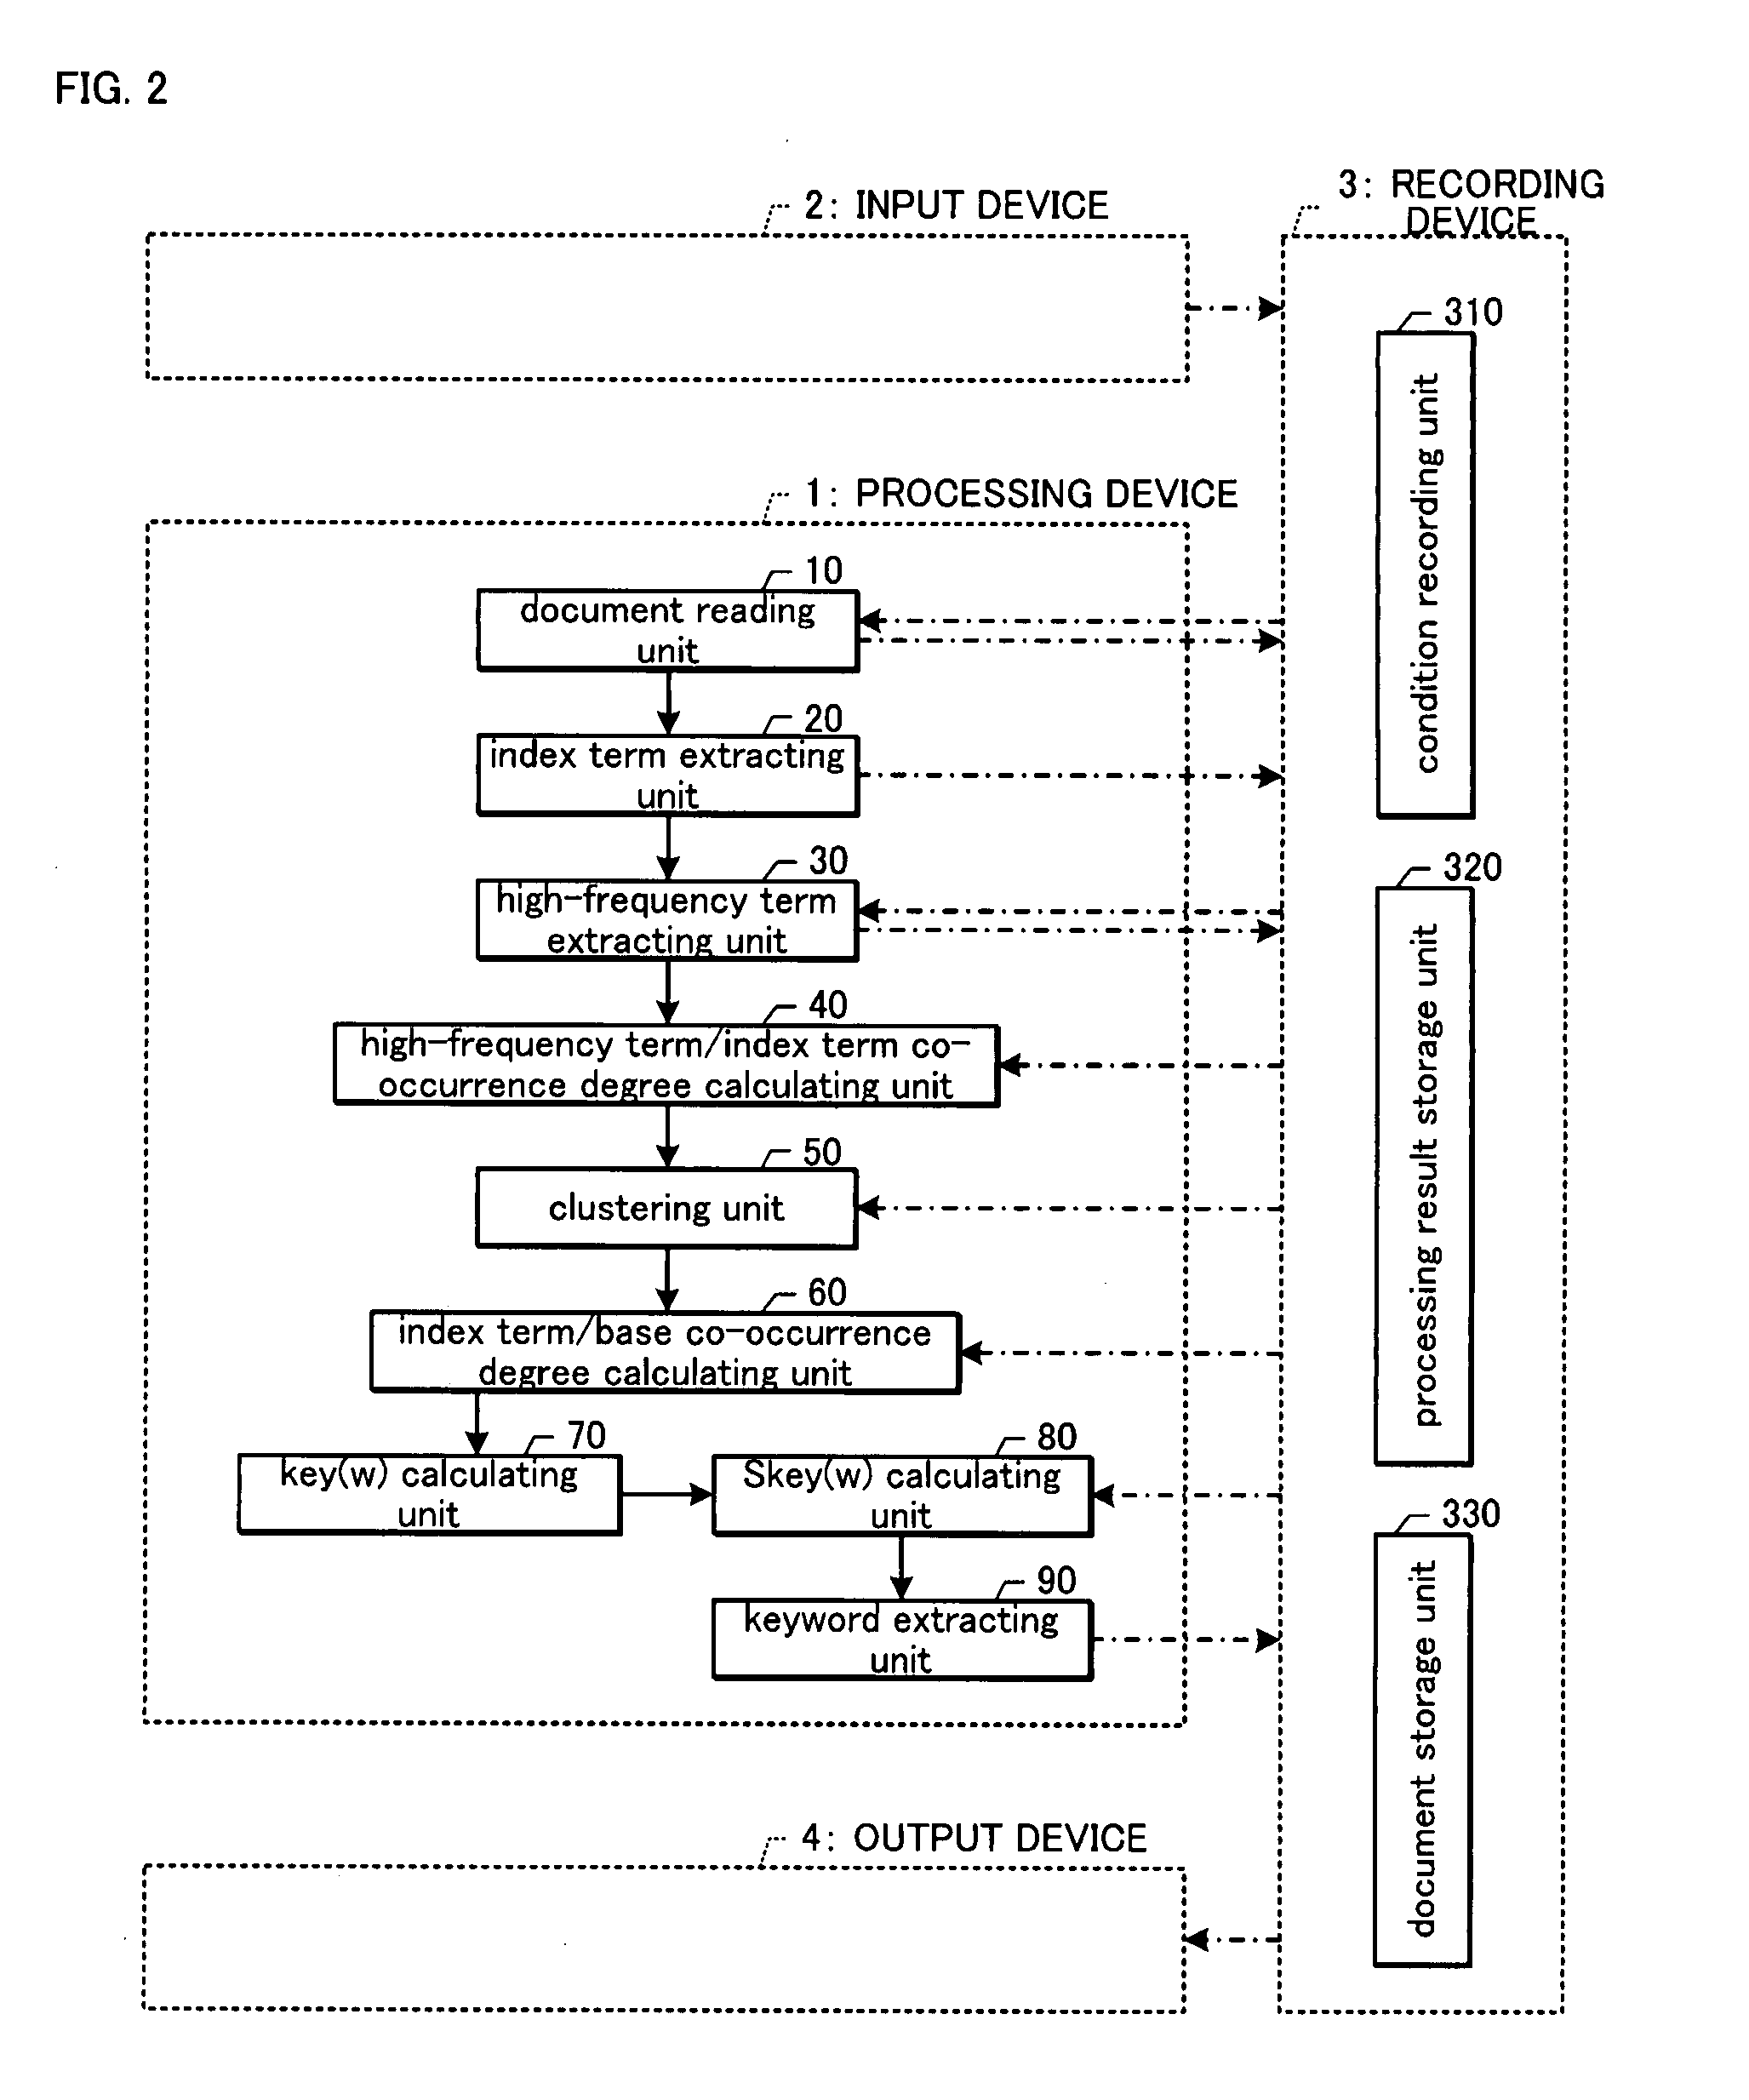 Keyword Extracting Device